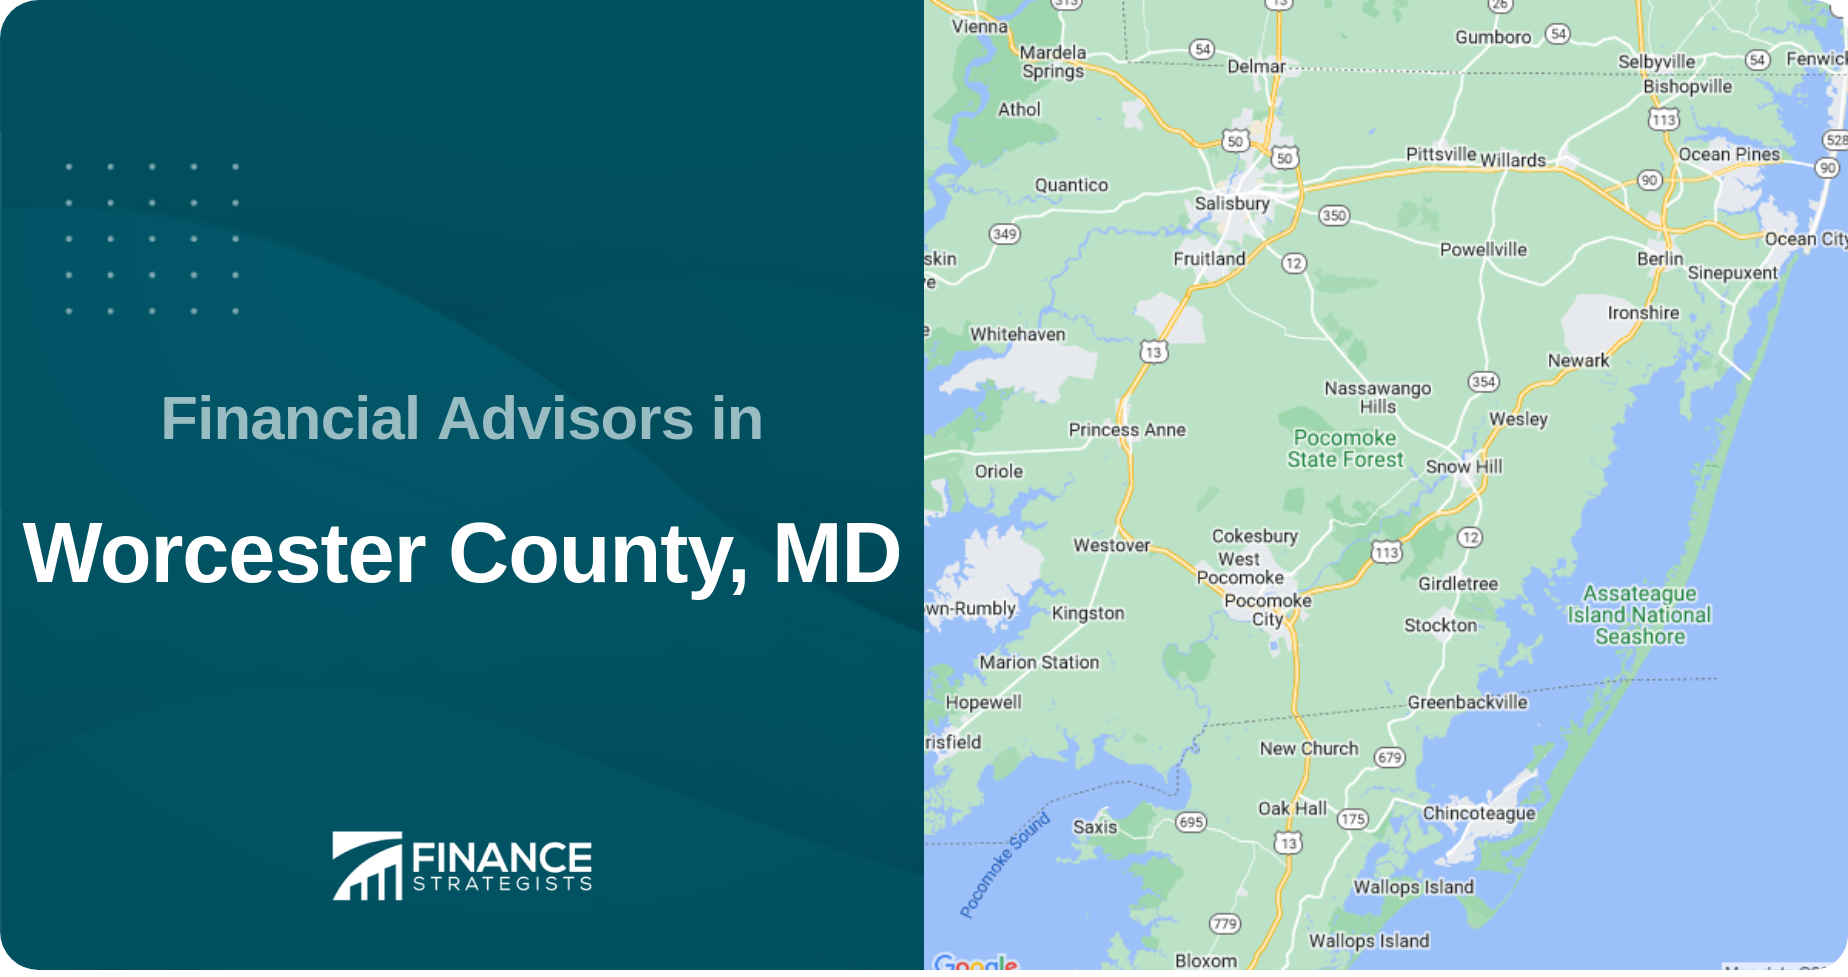 Financial Advisors in Worcester County, MD